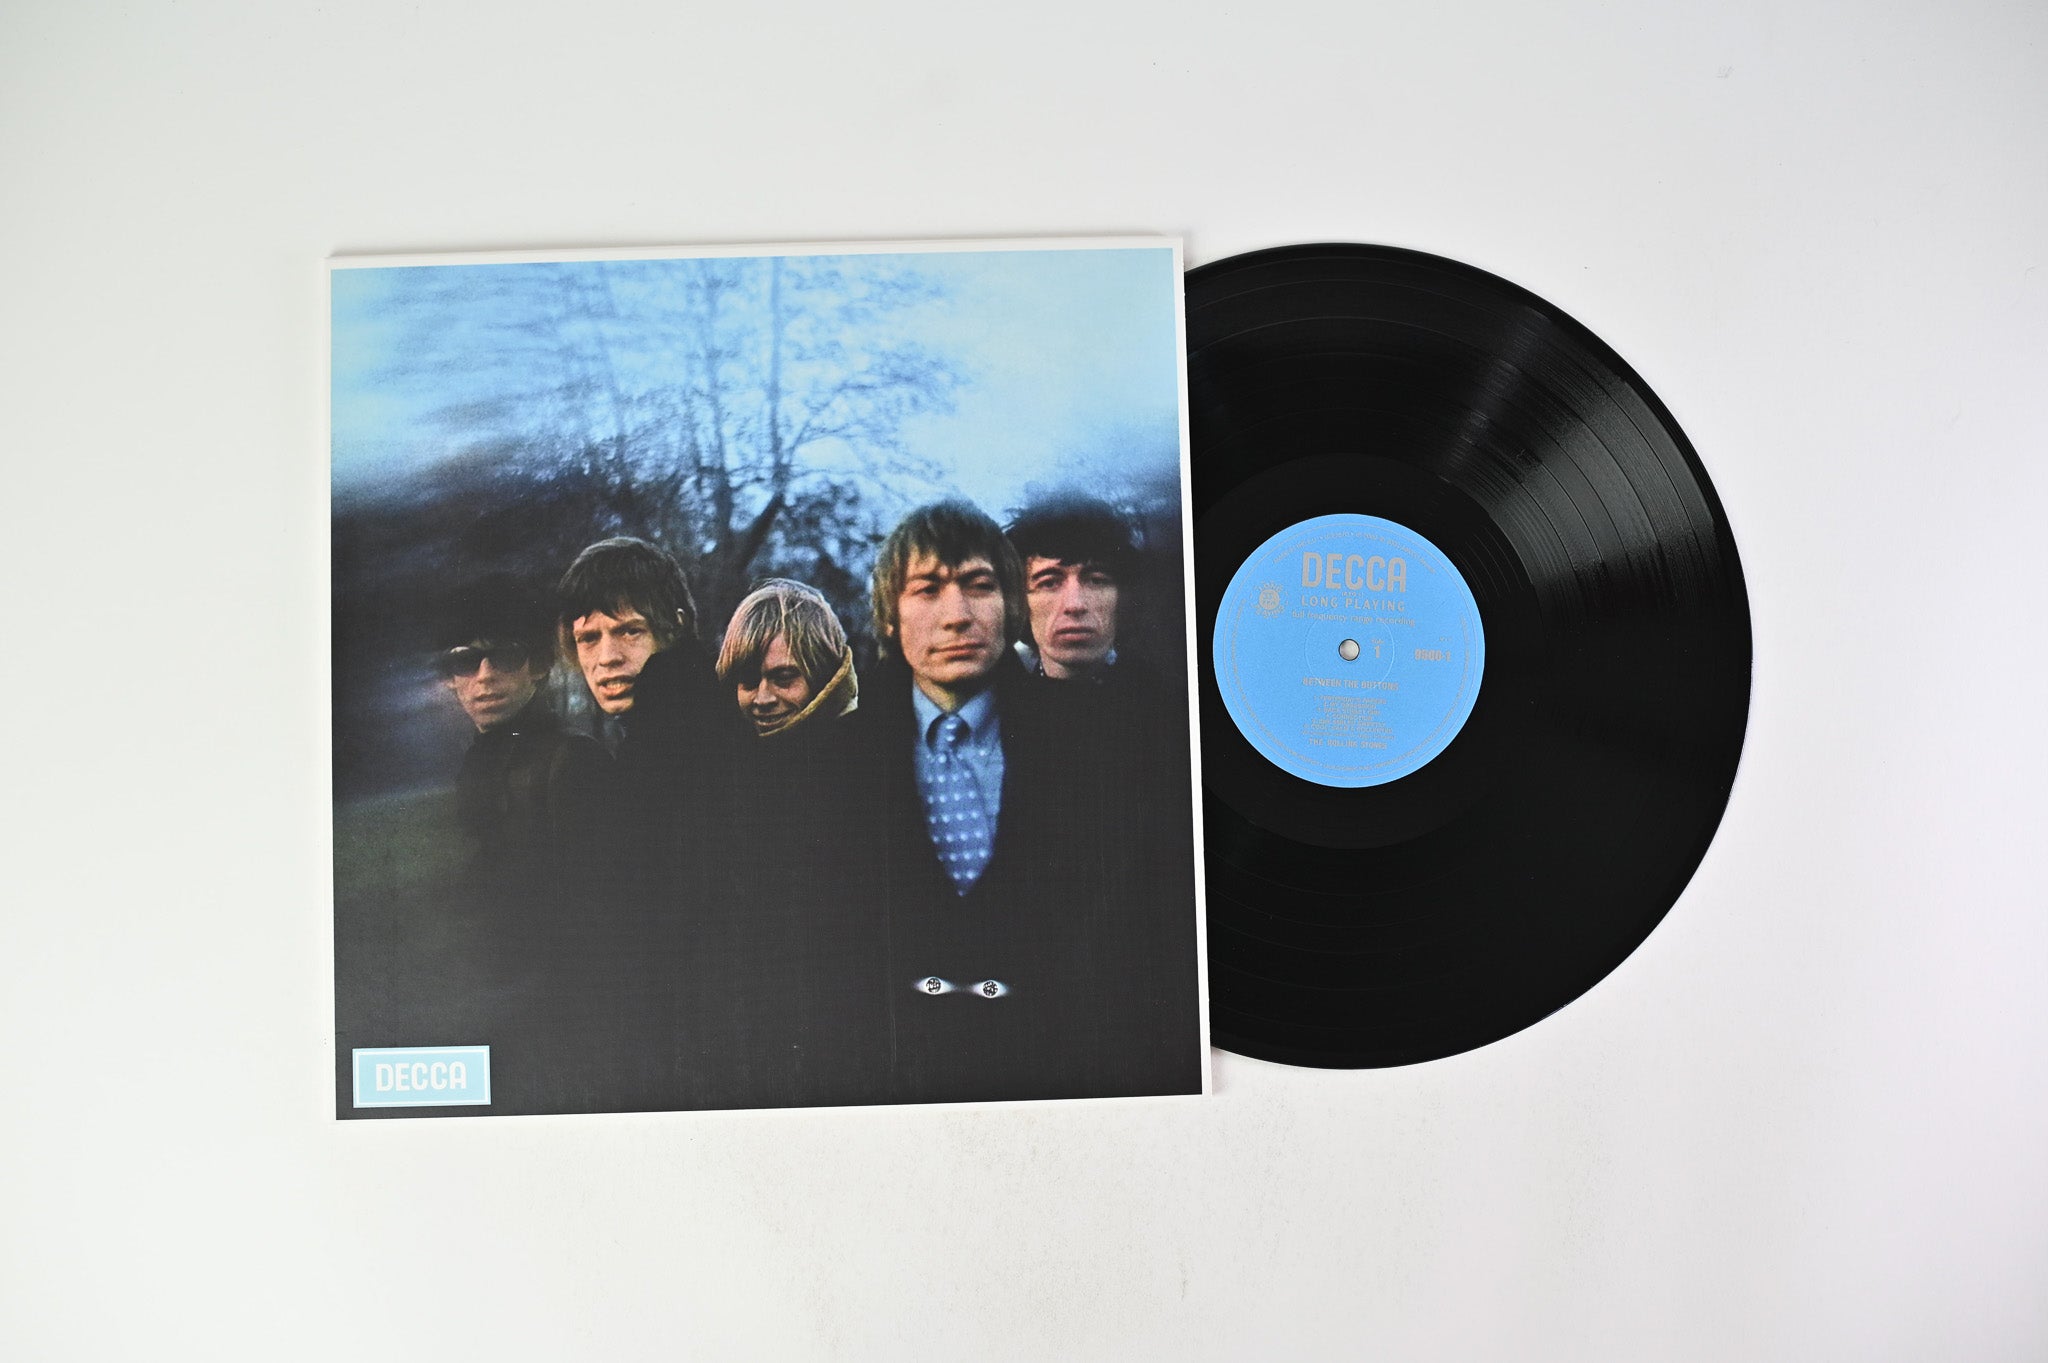 The Rolling Stones - Between The Buttons on ABKCO Reissue